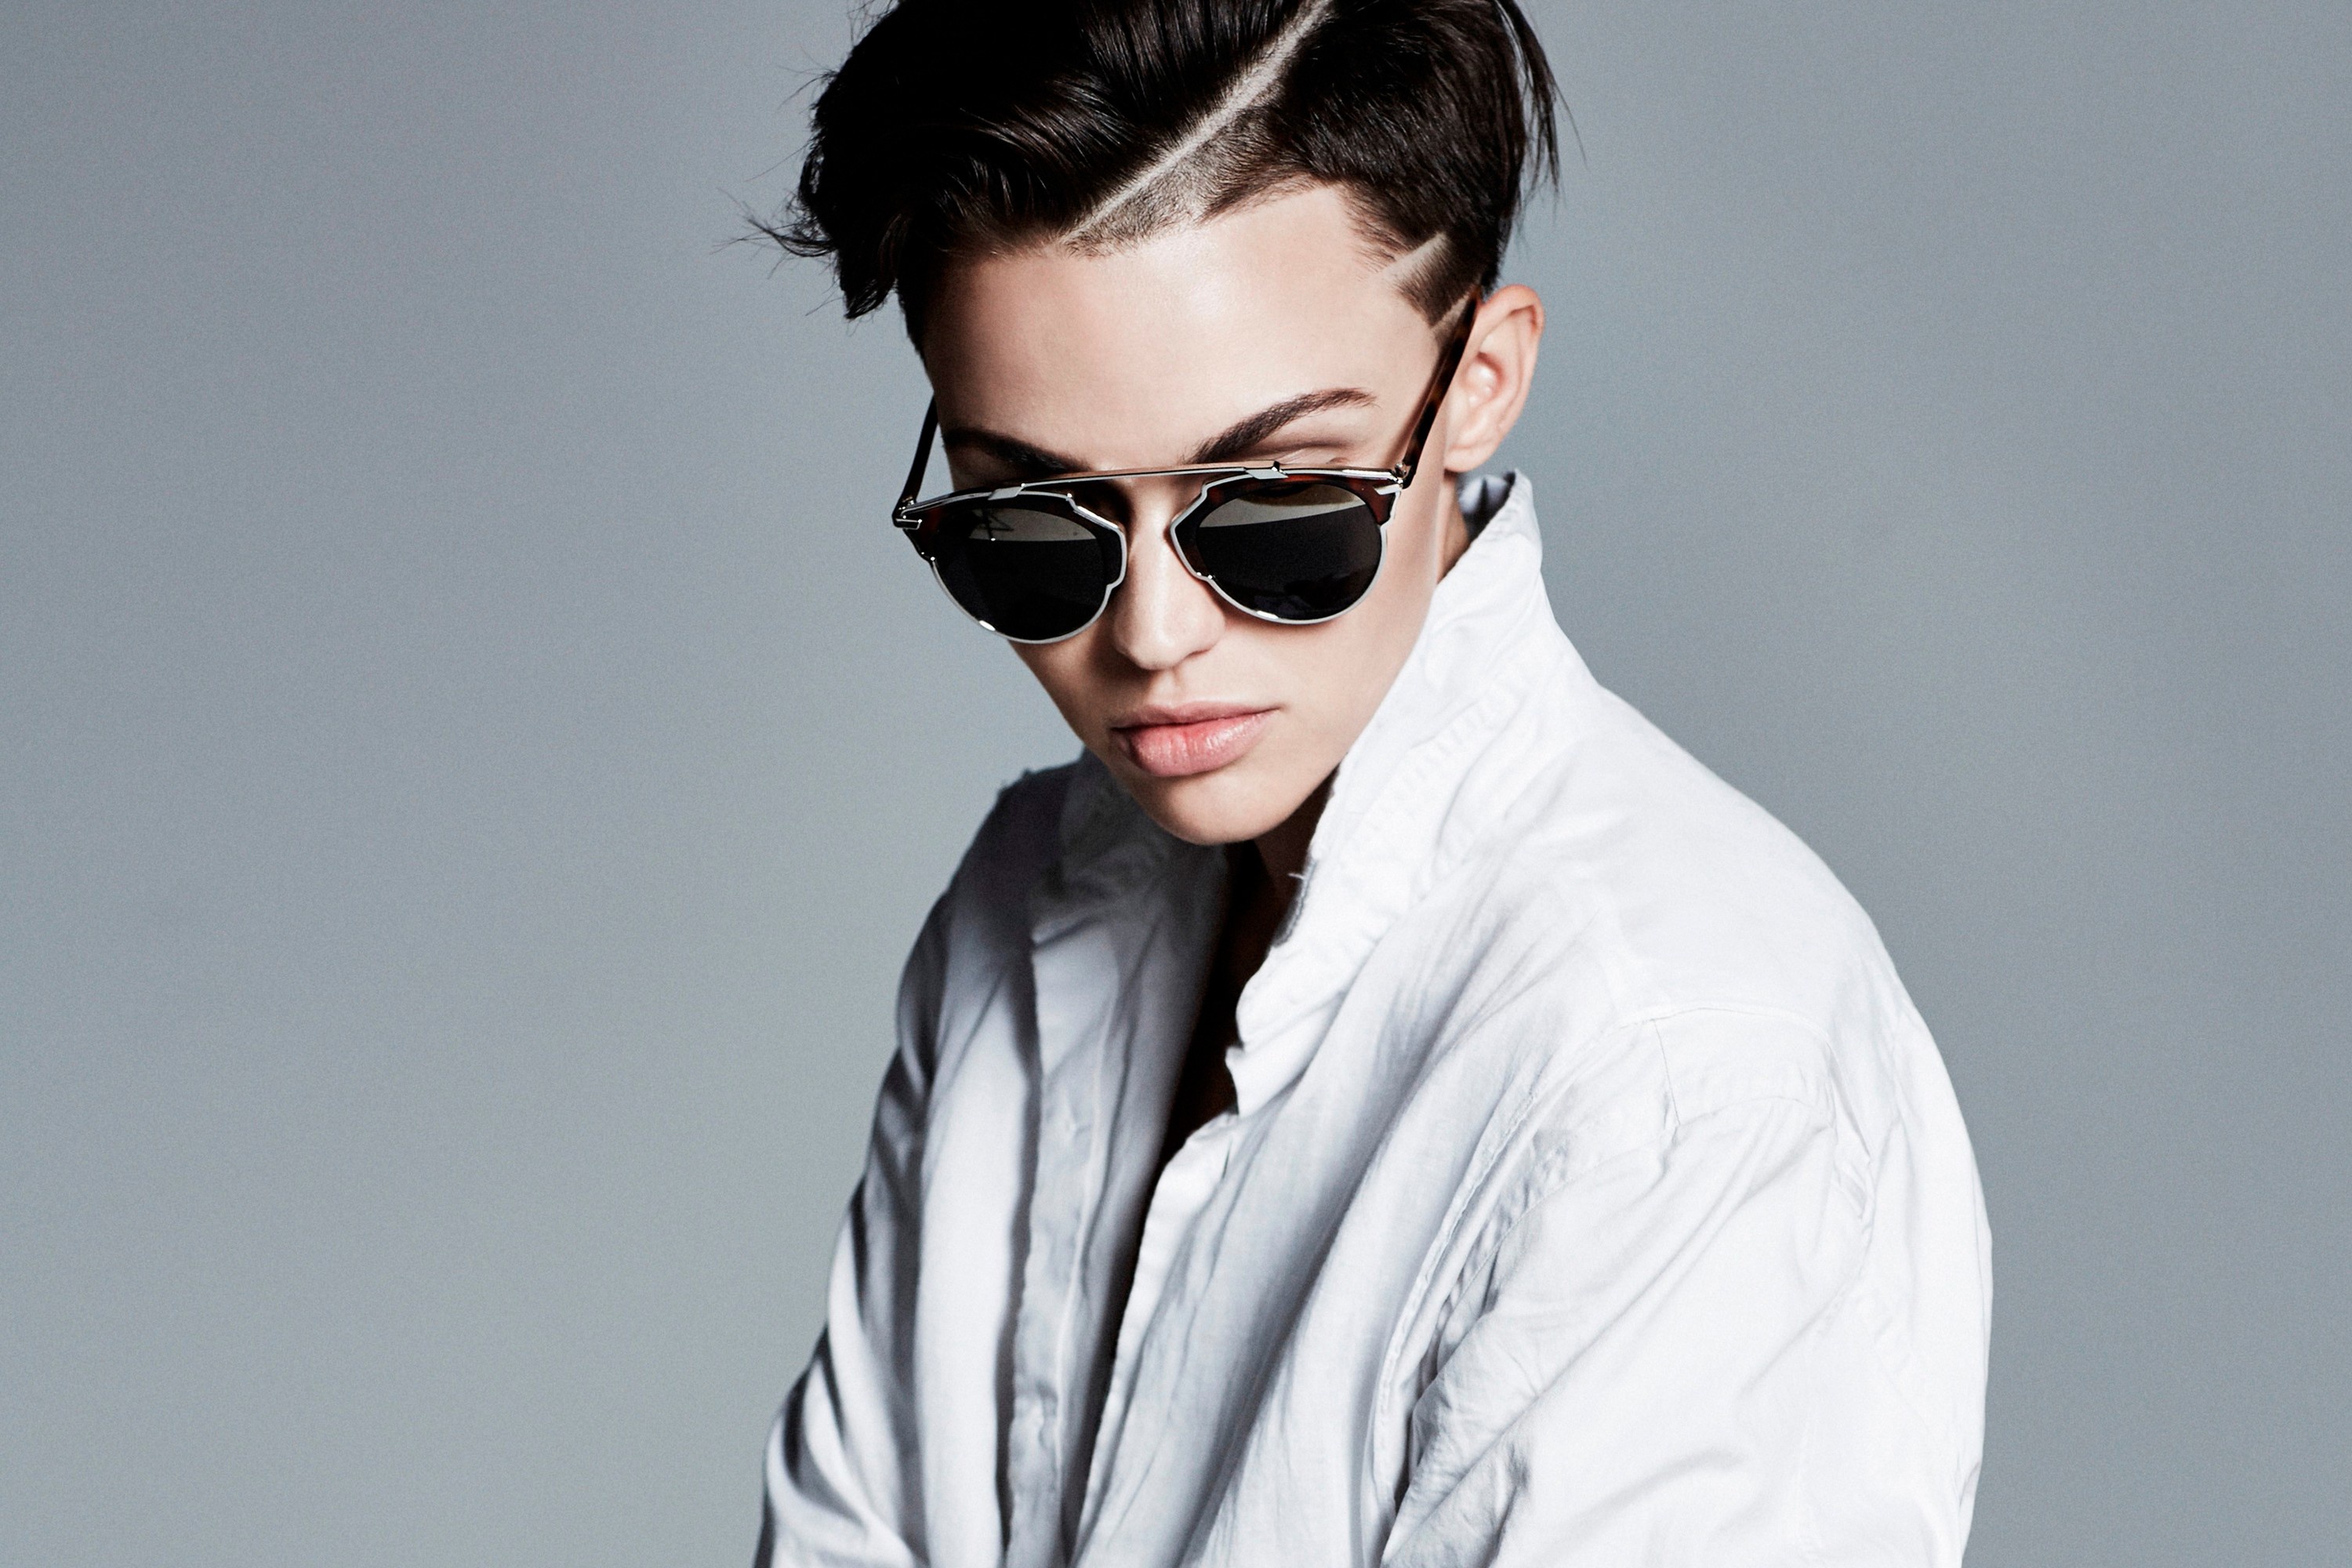 Portrait Of Young Woman With Short Hair And Round Sunglasses .